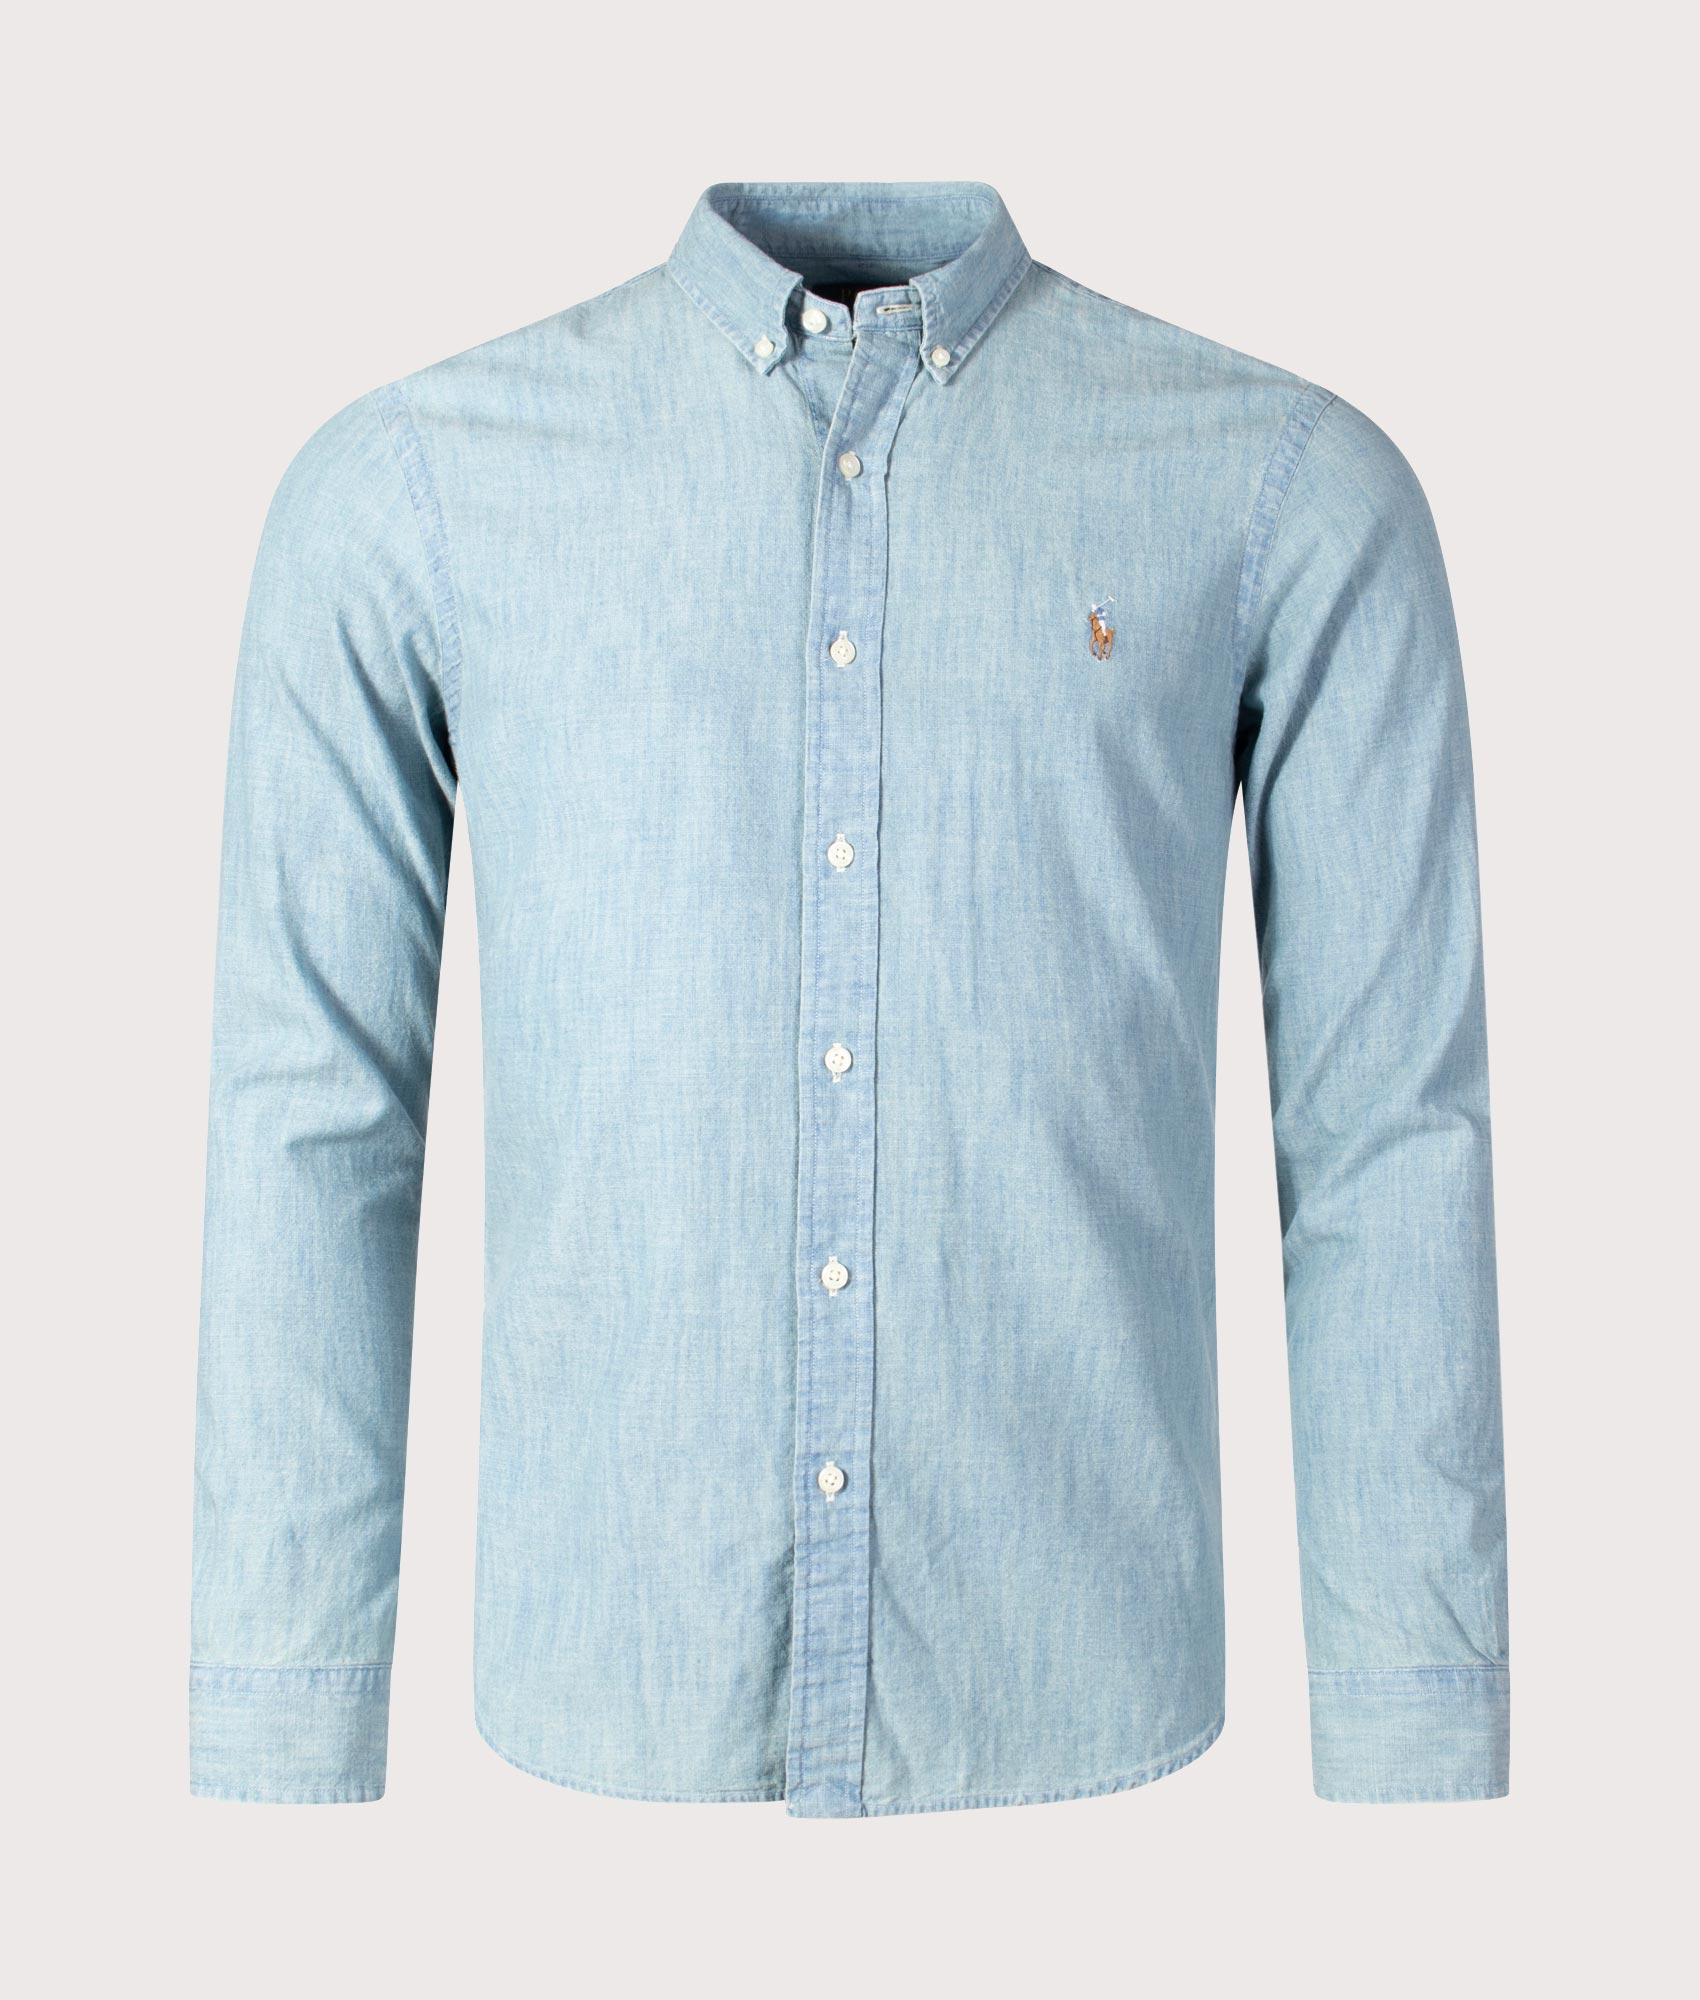 Polo Ralph Lauren Mens Slim Fit Chambray Shirt - Colour: 001 Chambray - Size: Large